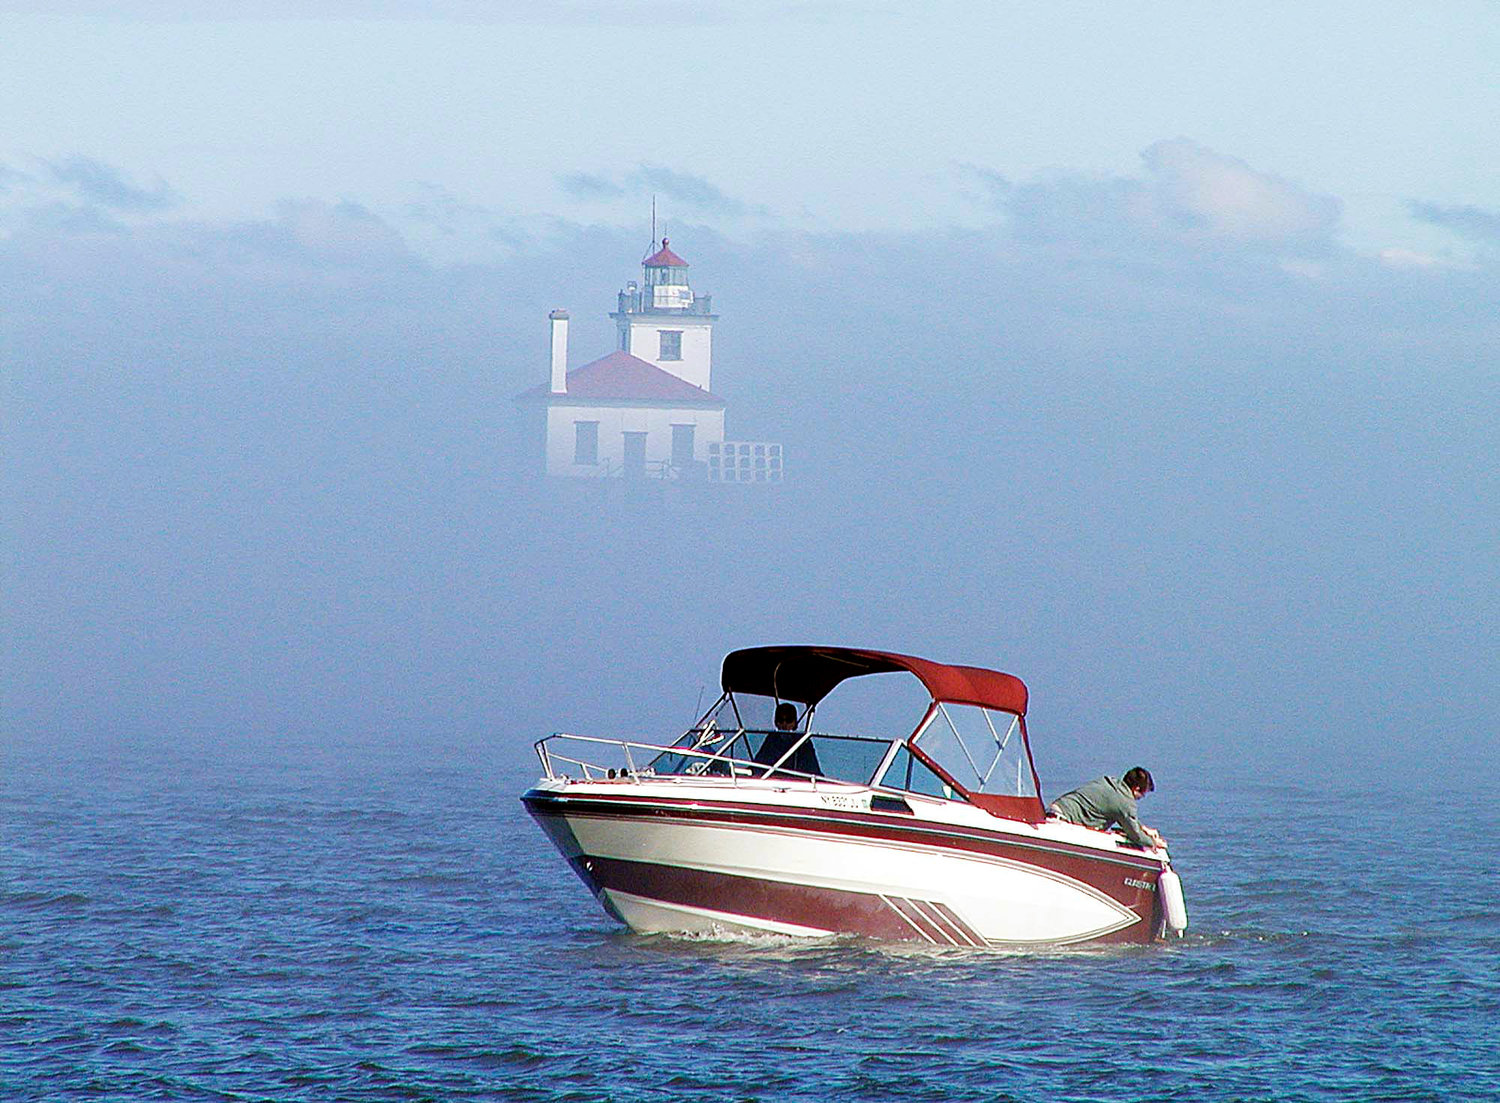 A fishing boat heads into the harbor at Oswego from Lake Ontario in this September 2004 file photo. A proposal to name the lake as a national marine sanctuary by the National Oceanic and Atmospheric Administration has gained steam.